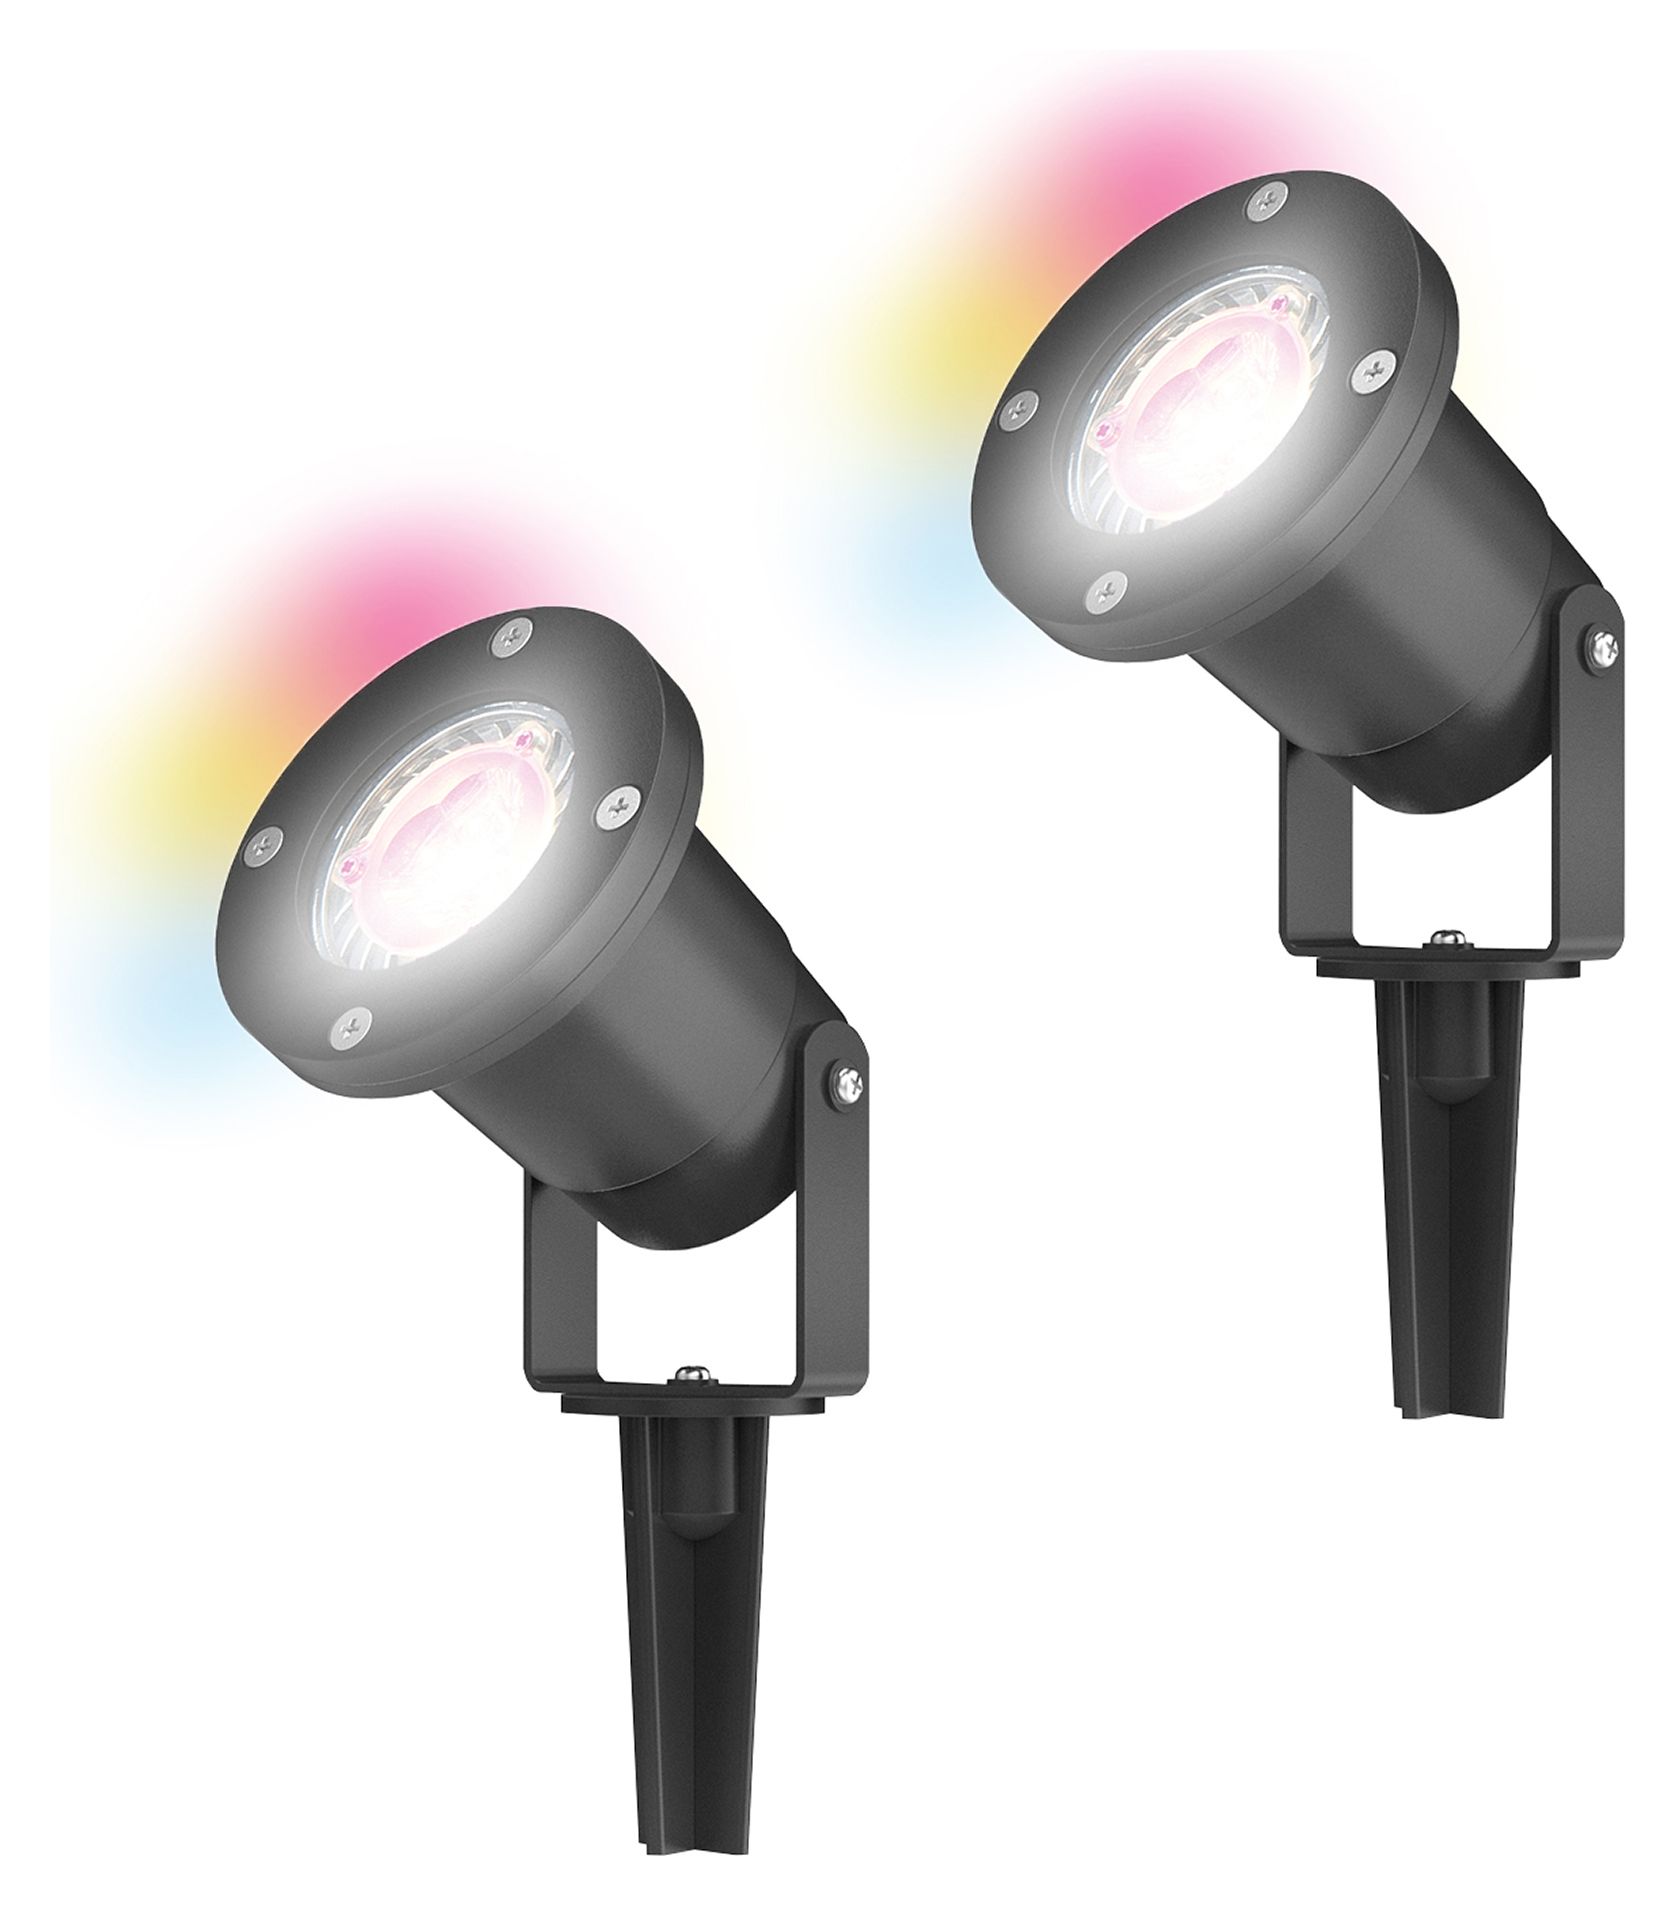 Image of 4lite WiZ Smart LED IP65 Spike Light Twin Pack with GU10 Lamps